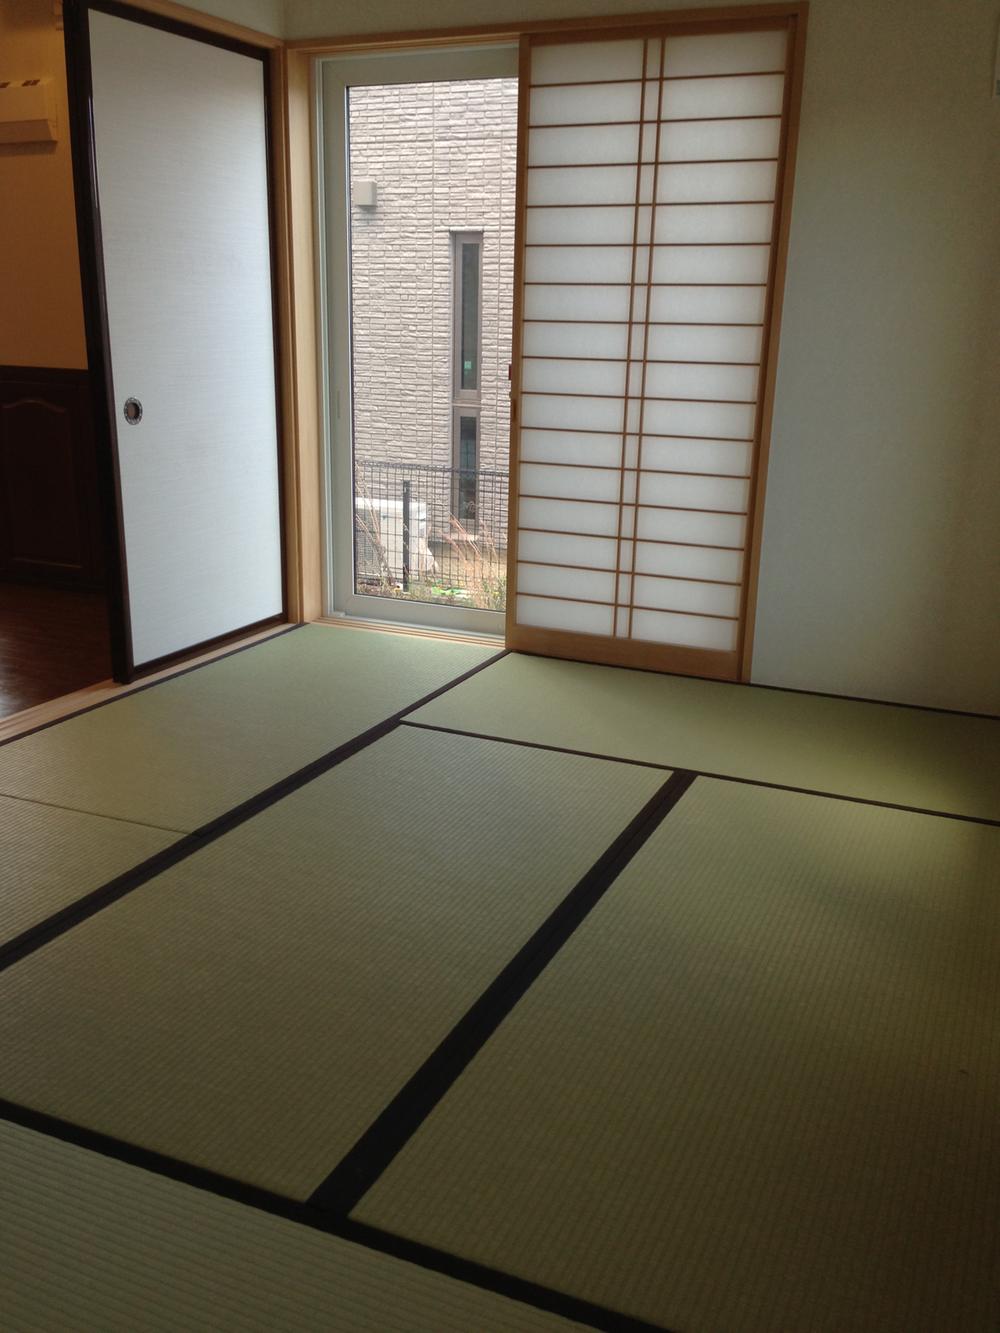 Other introspection. Japanese-style room (January 2013) Shooting